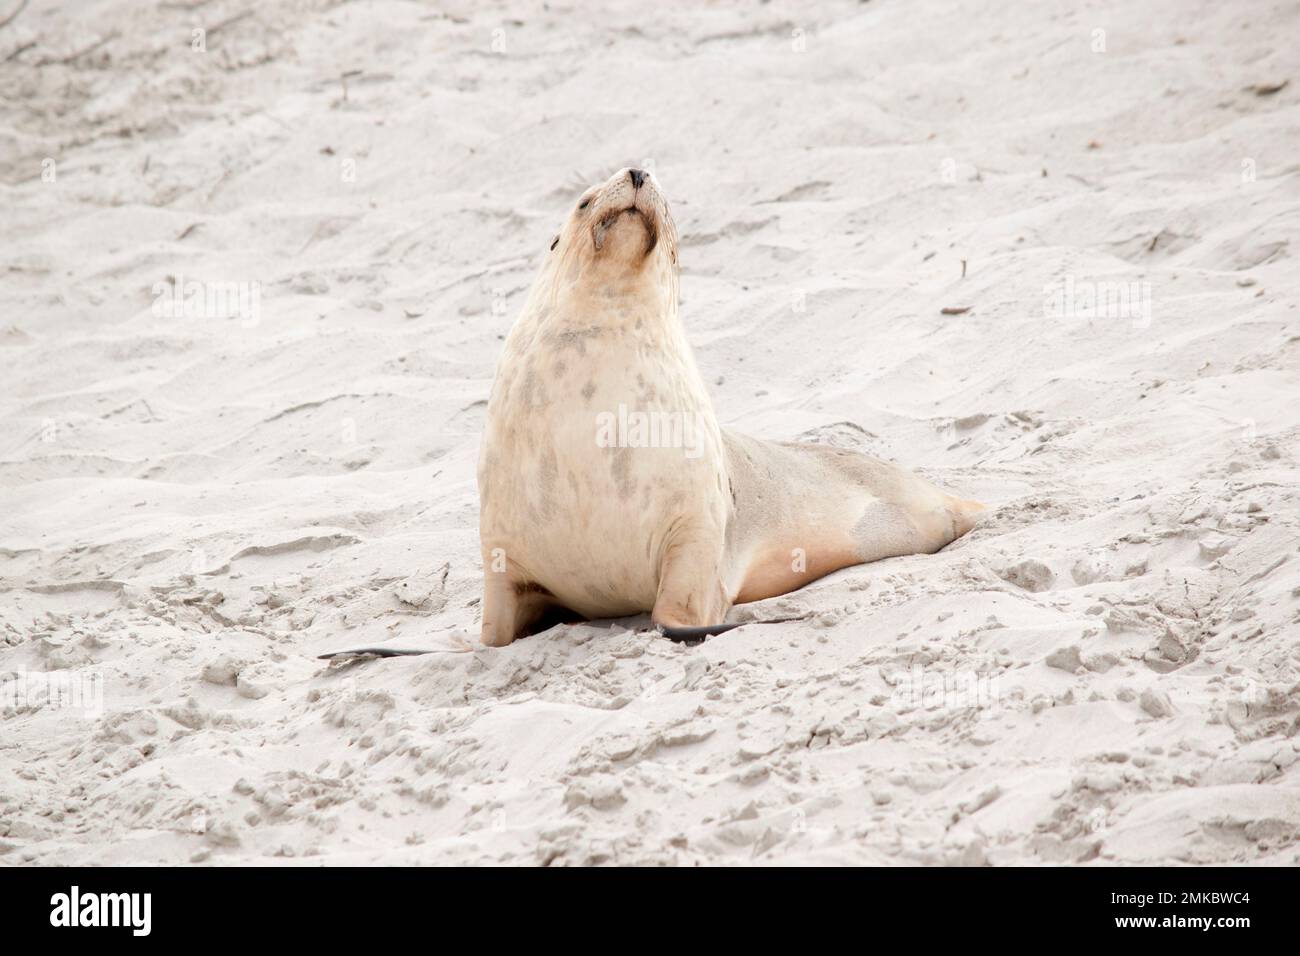 the sea lion cover its body with sand to keep warm Stock Photo